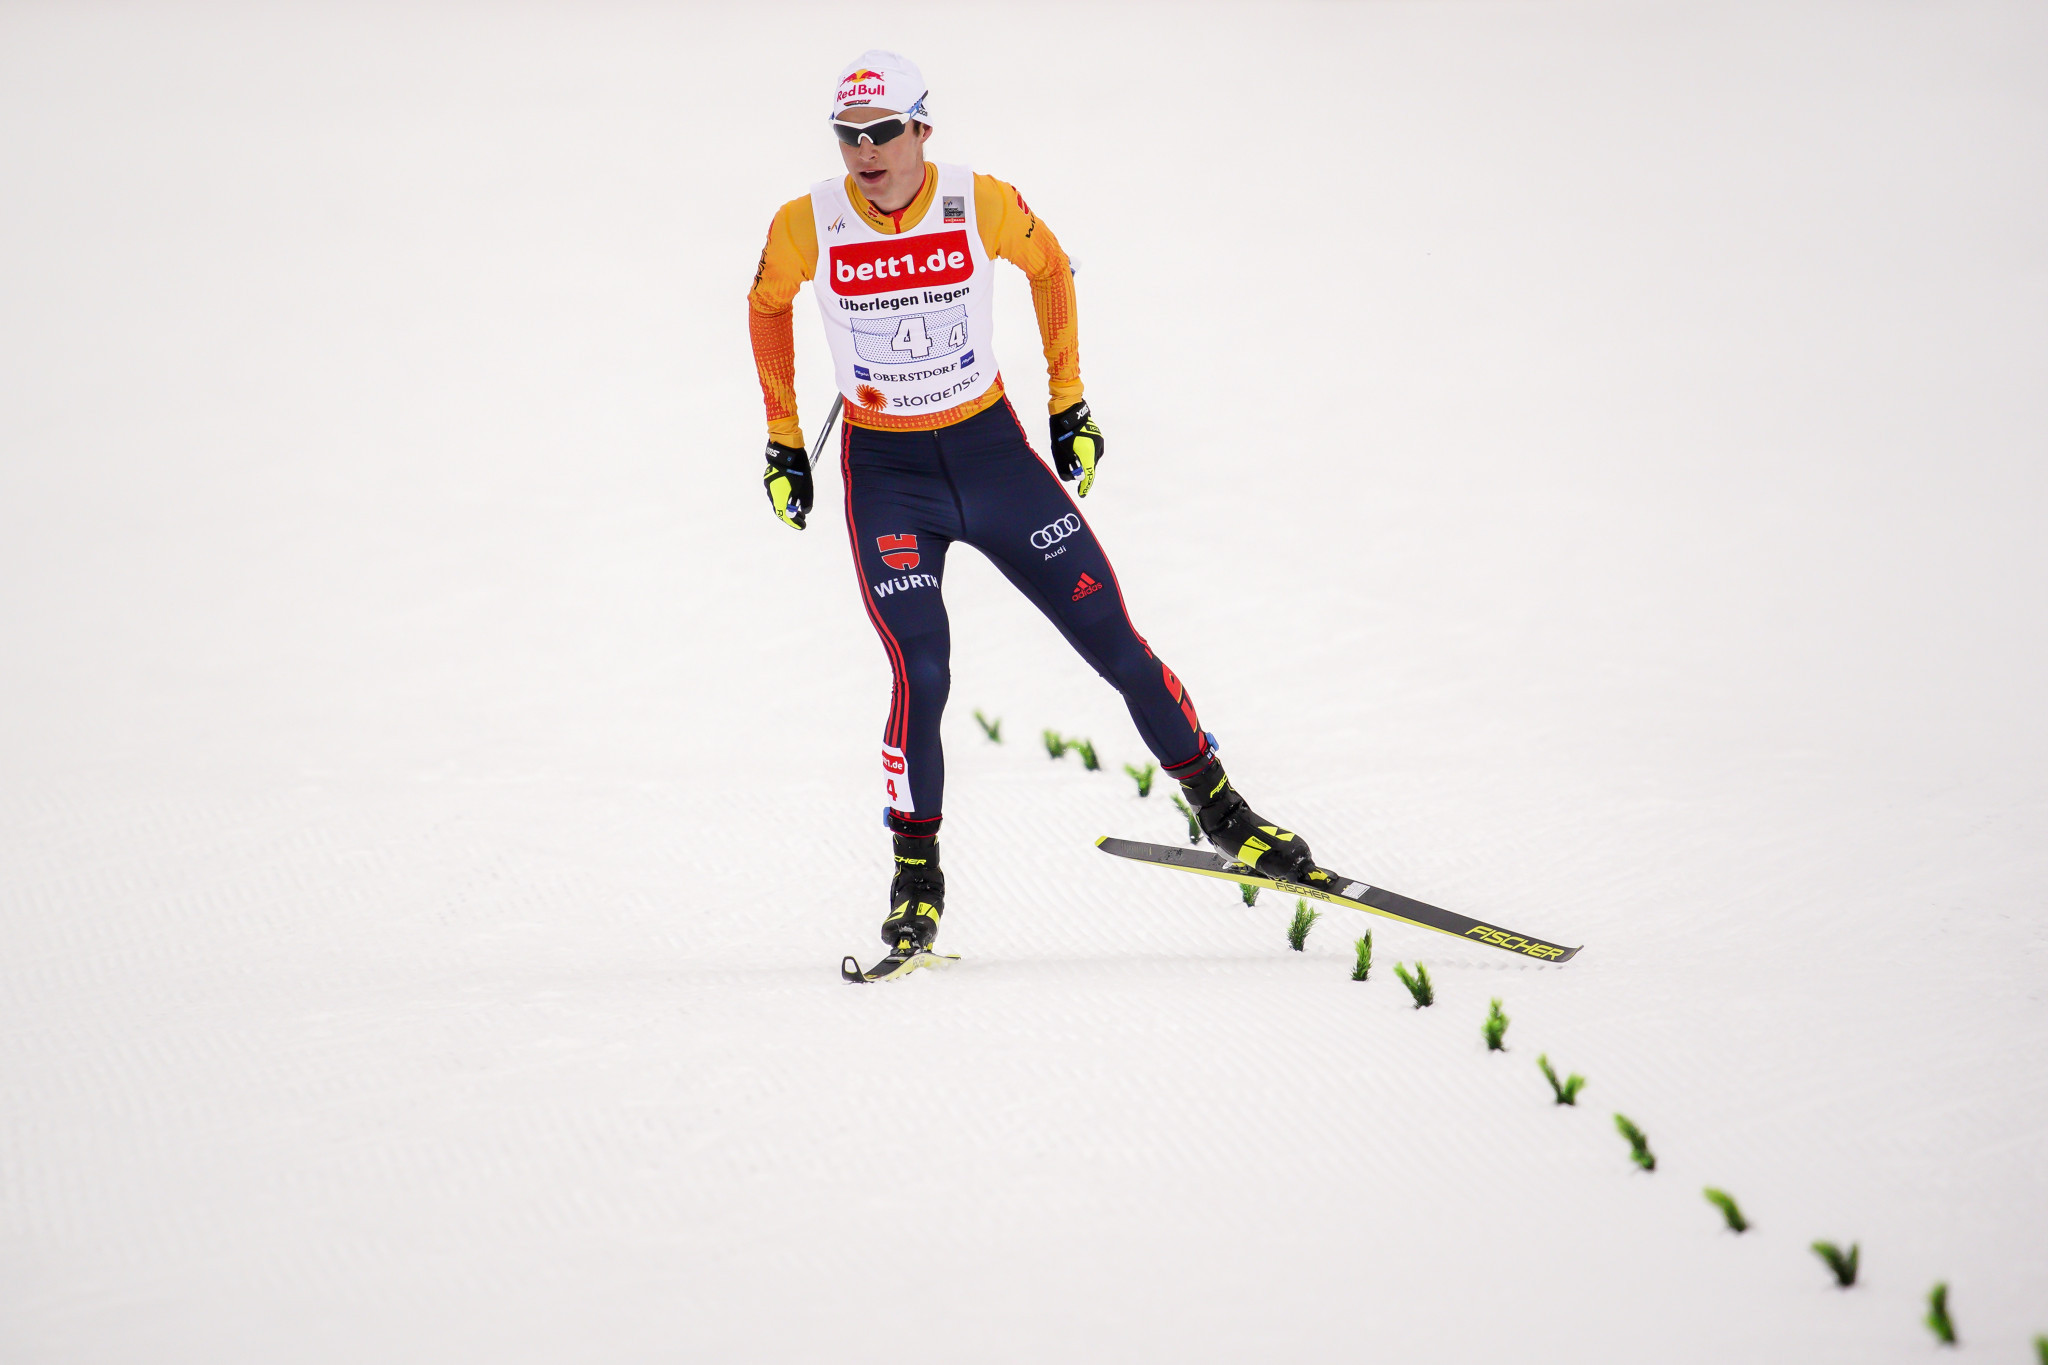 Vinzenz Geiger is among the skiers seeking to take advantage of Jarl Magnus Riiber's absence ©Getty Images